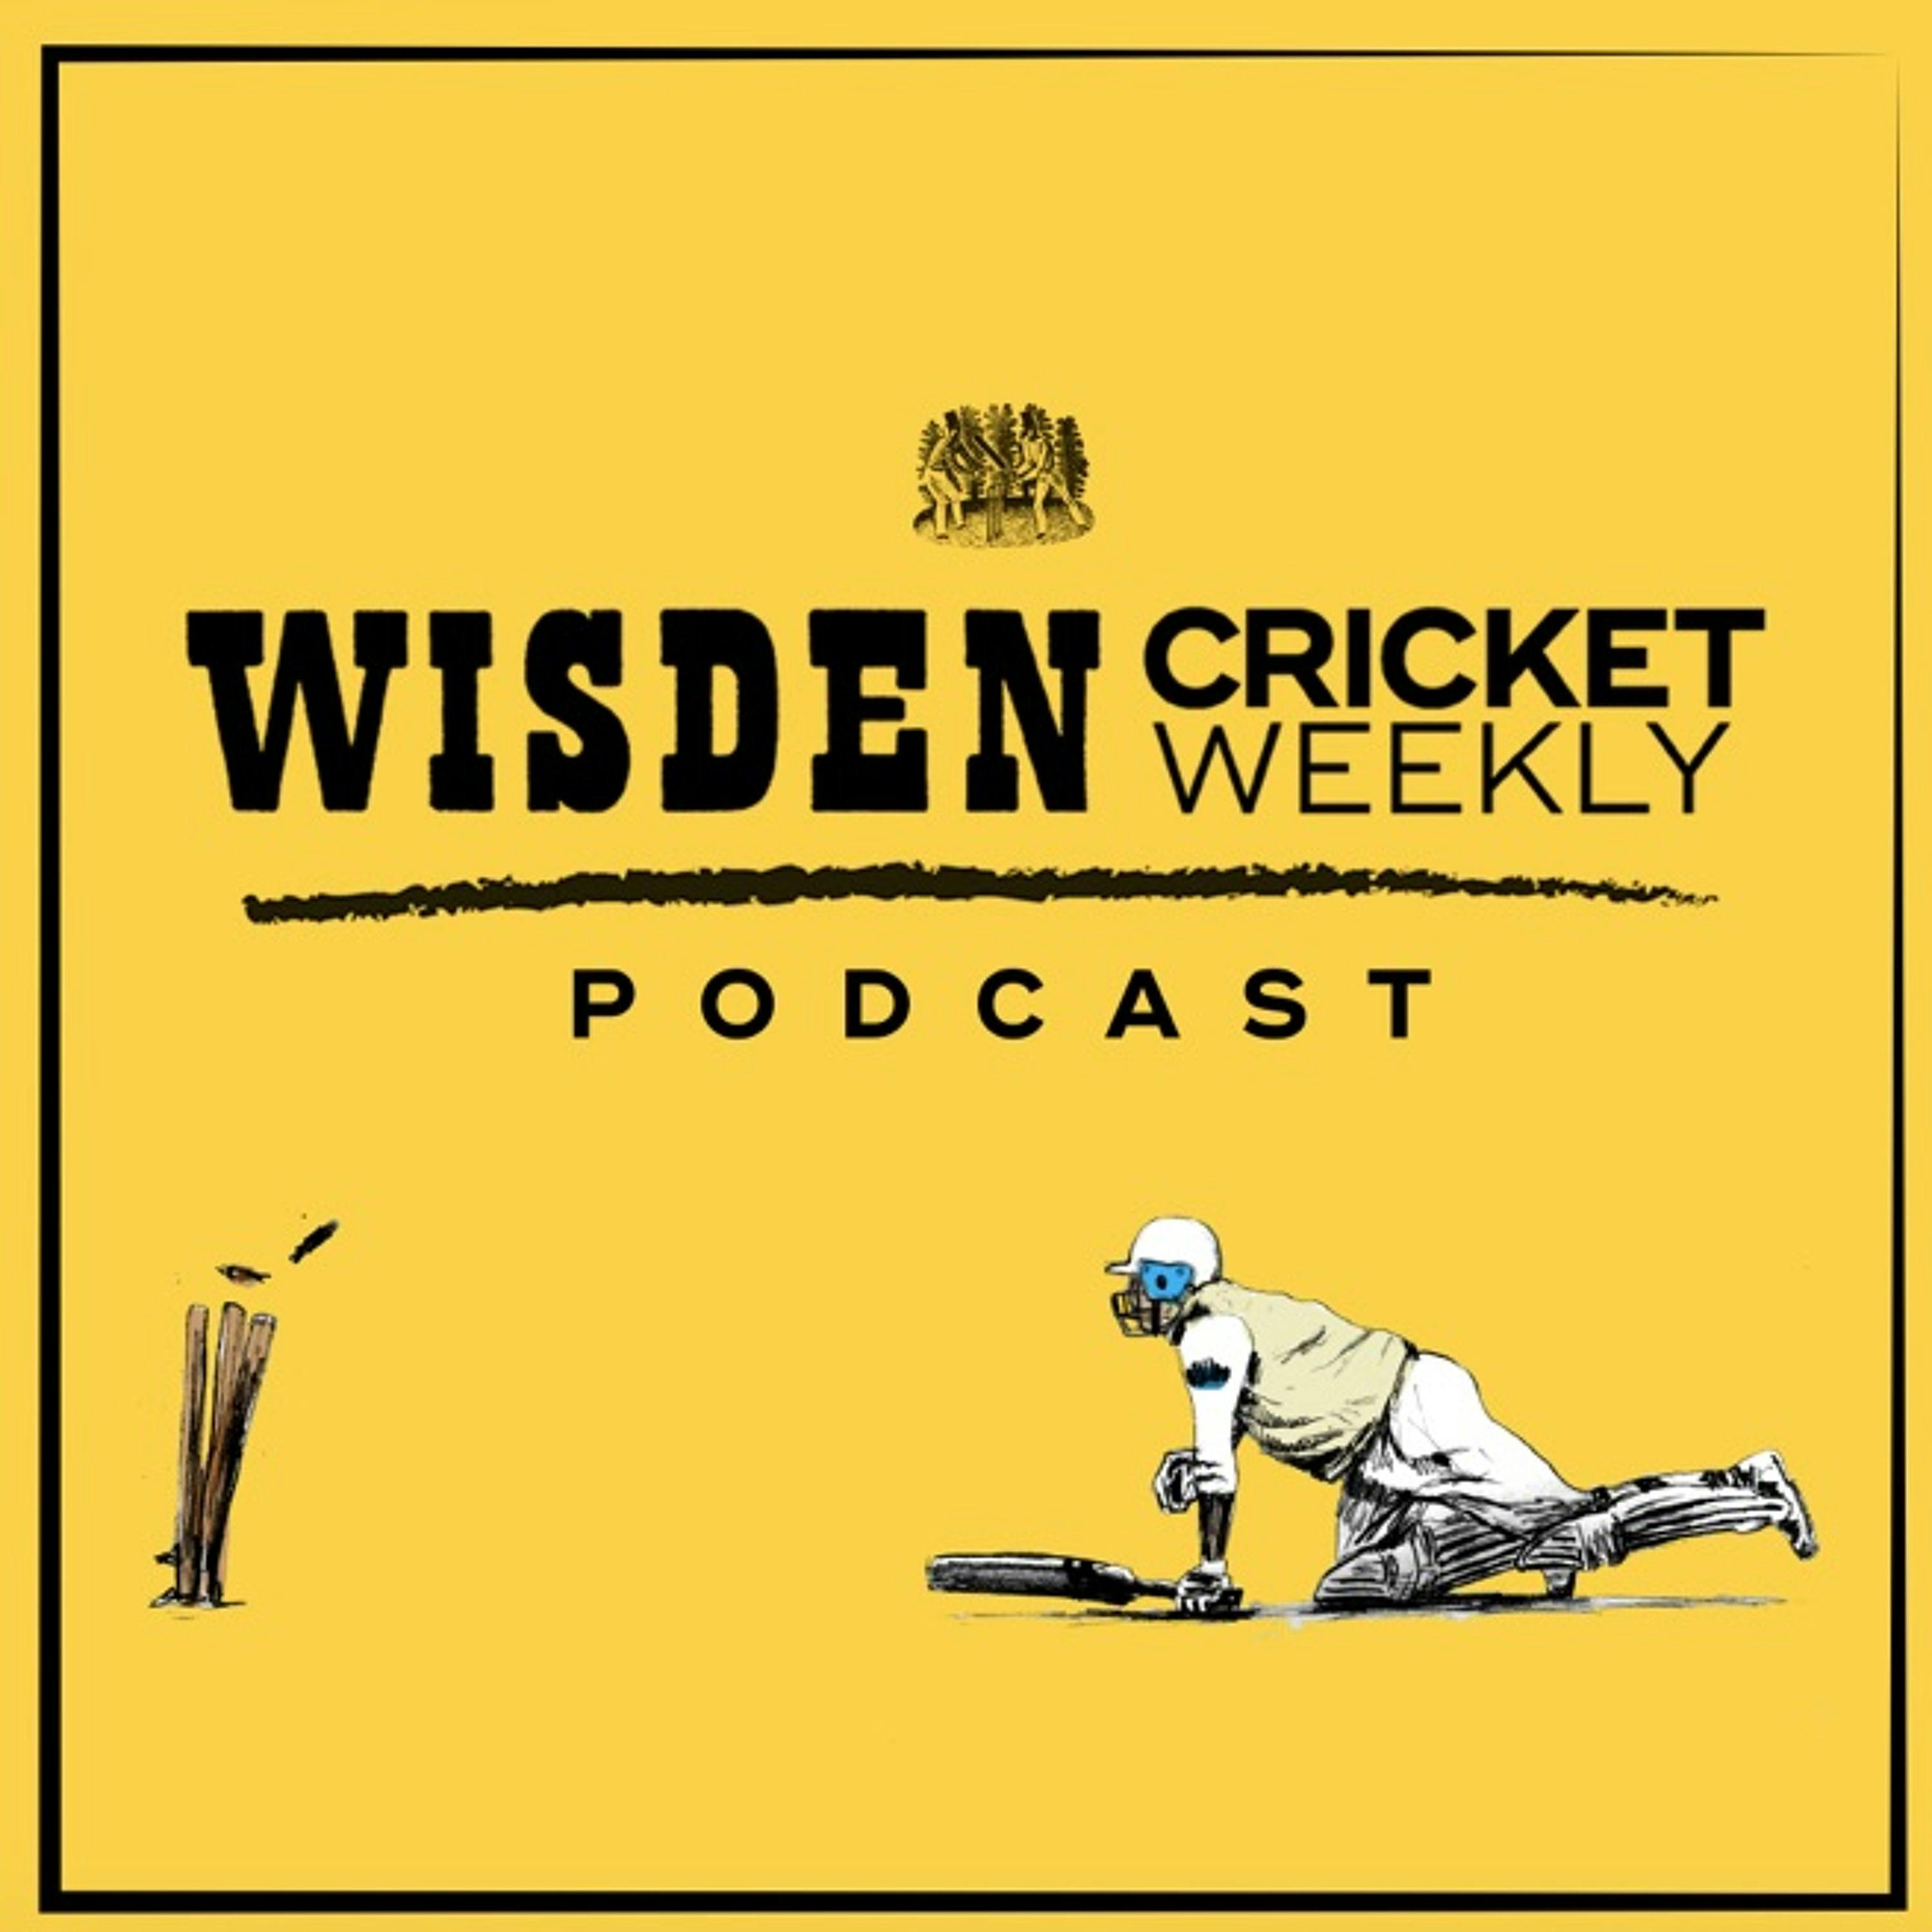 Episode 24:  Clarke and Duckett on The Hundred, the 2005 Ashes, Moores, Moeen and Social Media